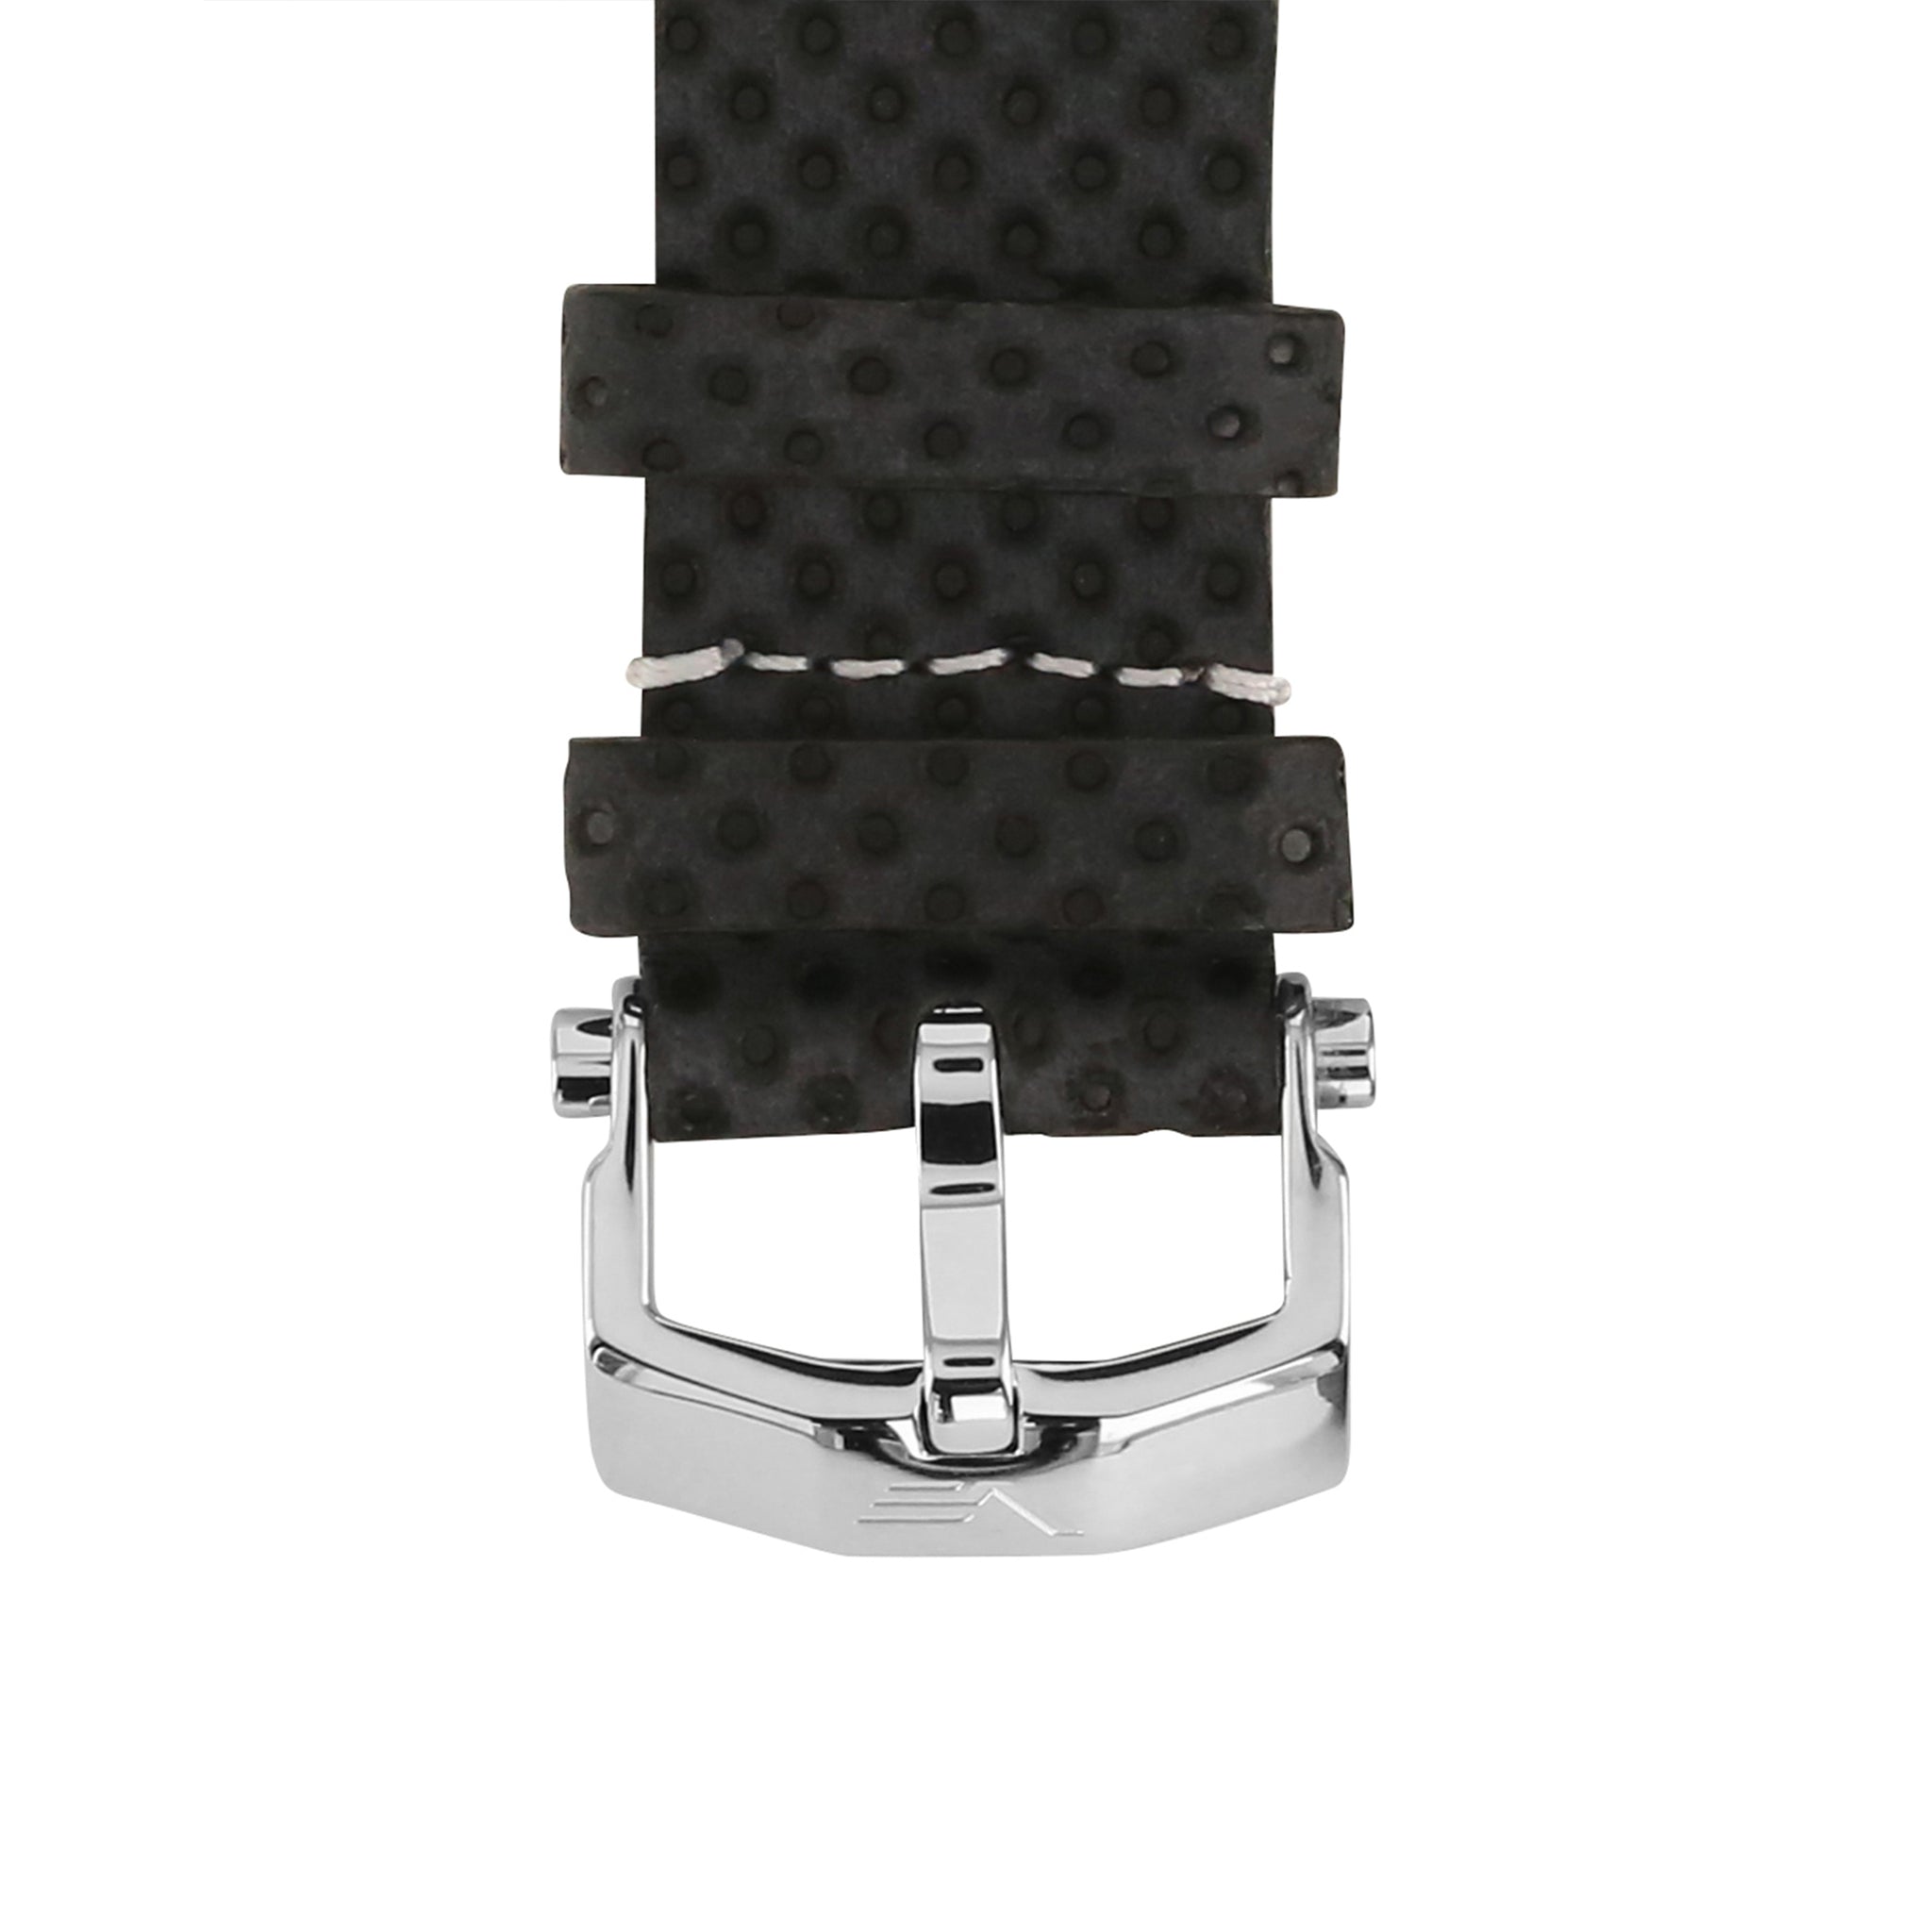 ENERGIA BLACK & WHITE LEATHER STRAP 26mm - POLISHED BUCKLE